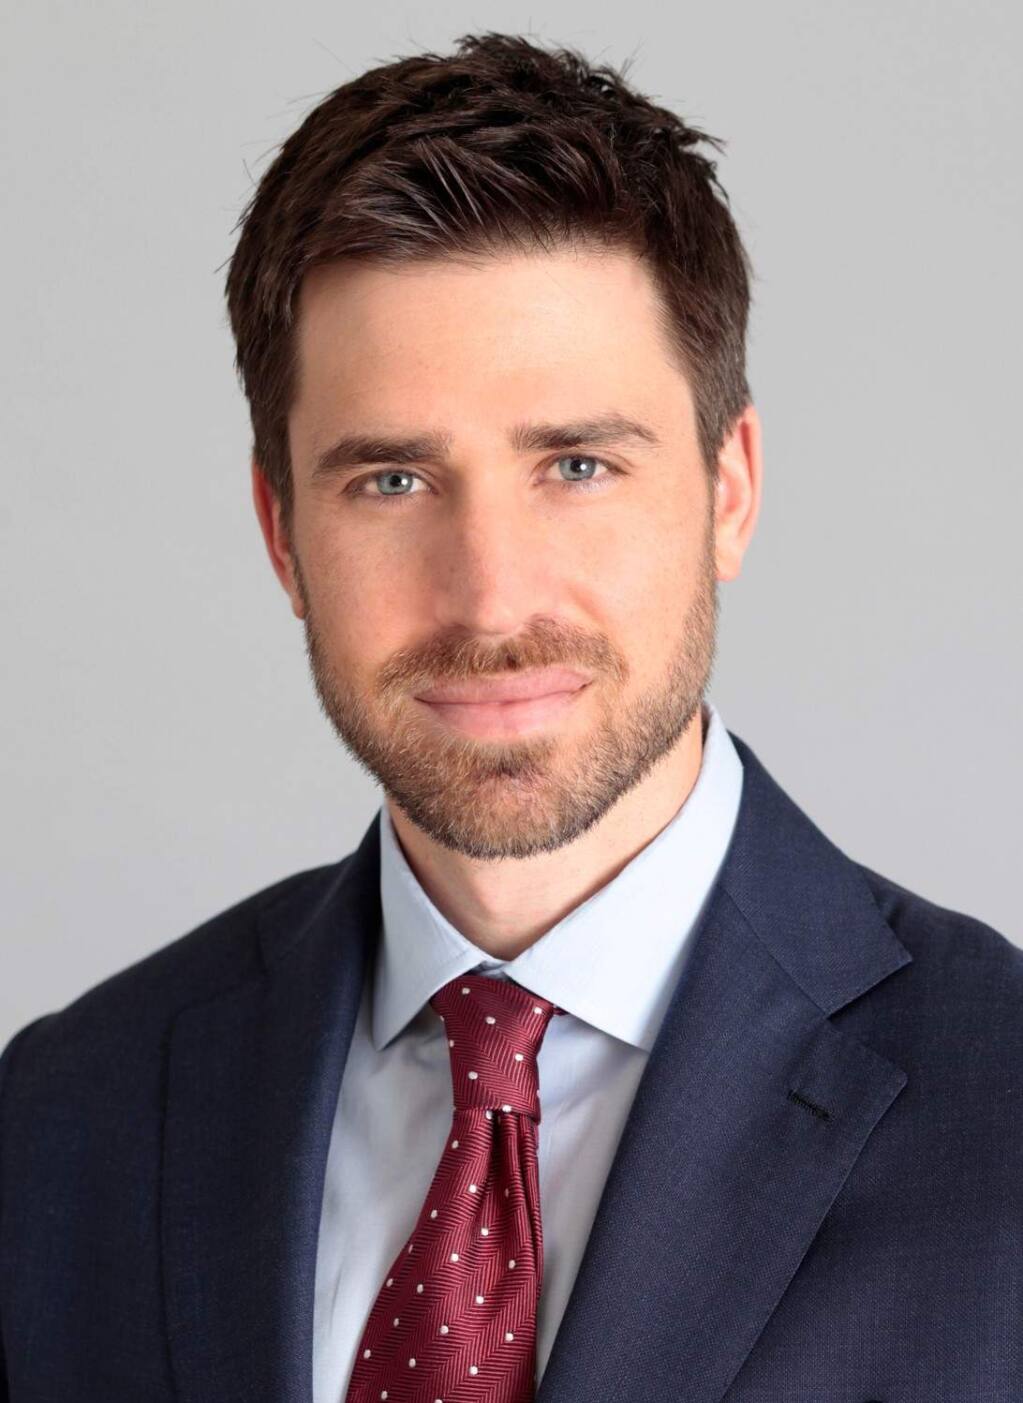 Jesse Debban is a business transactions partner at Farella Braun + Martel, a law firm with offices in San Francisco and St. Helena.